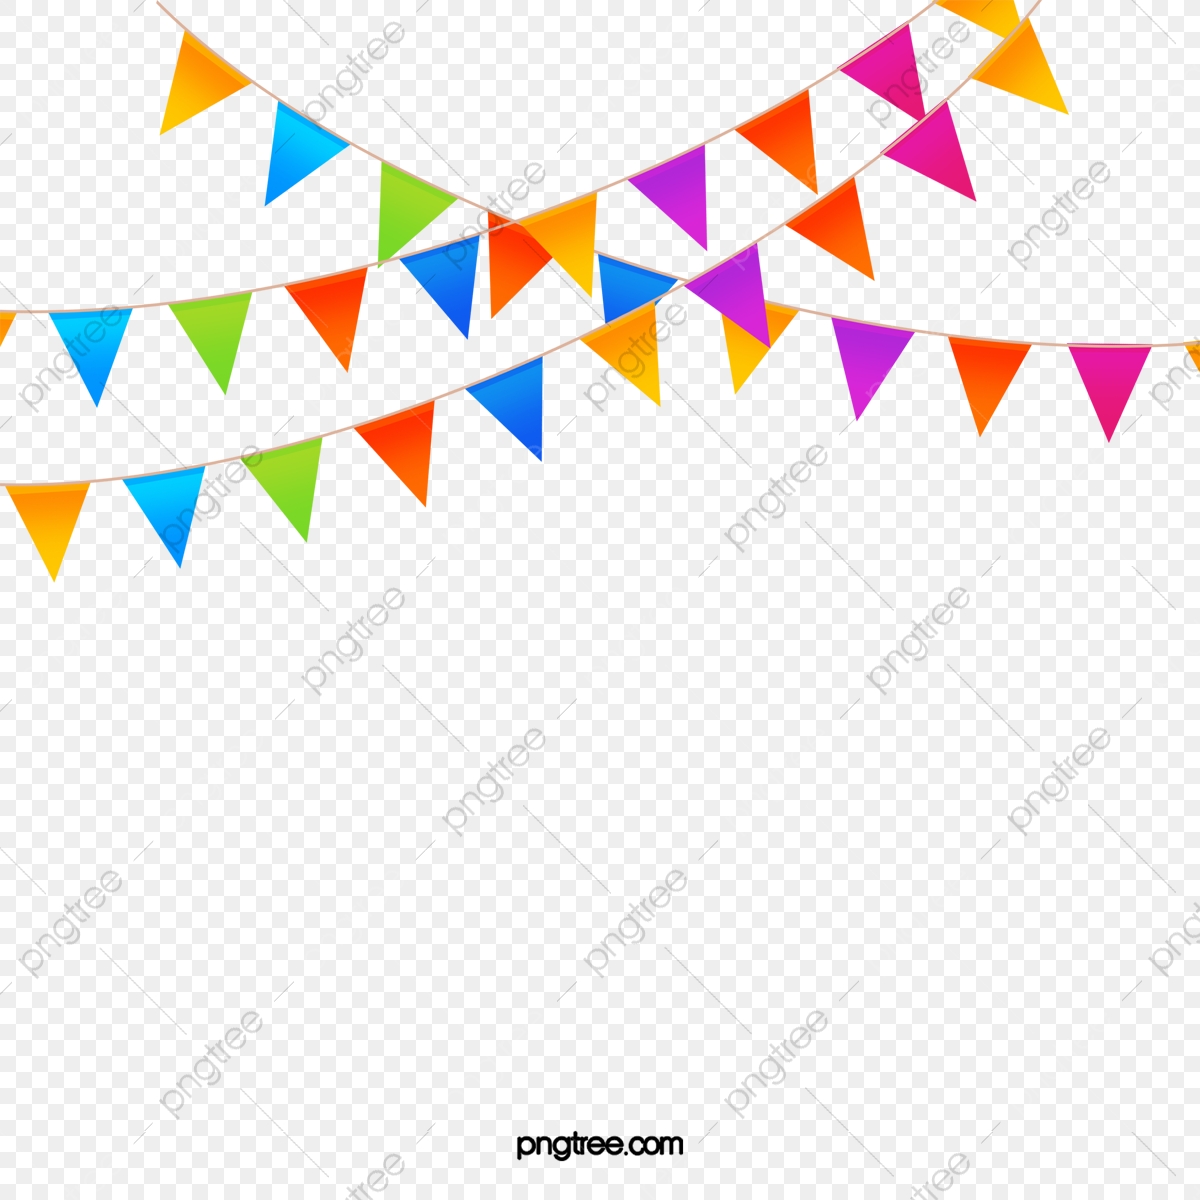 Pennant banner clip art free clipart images gallery for free